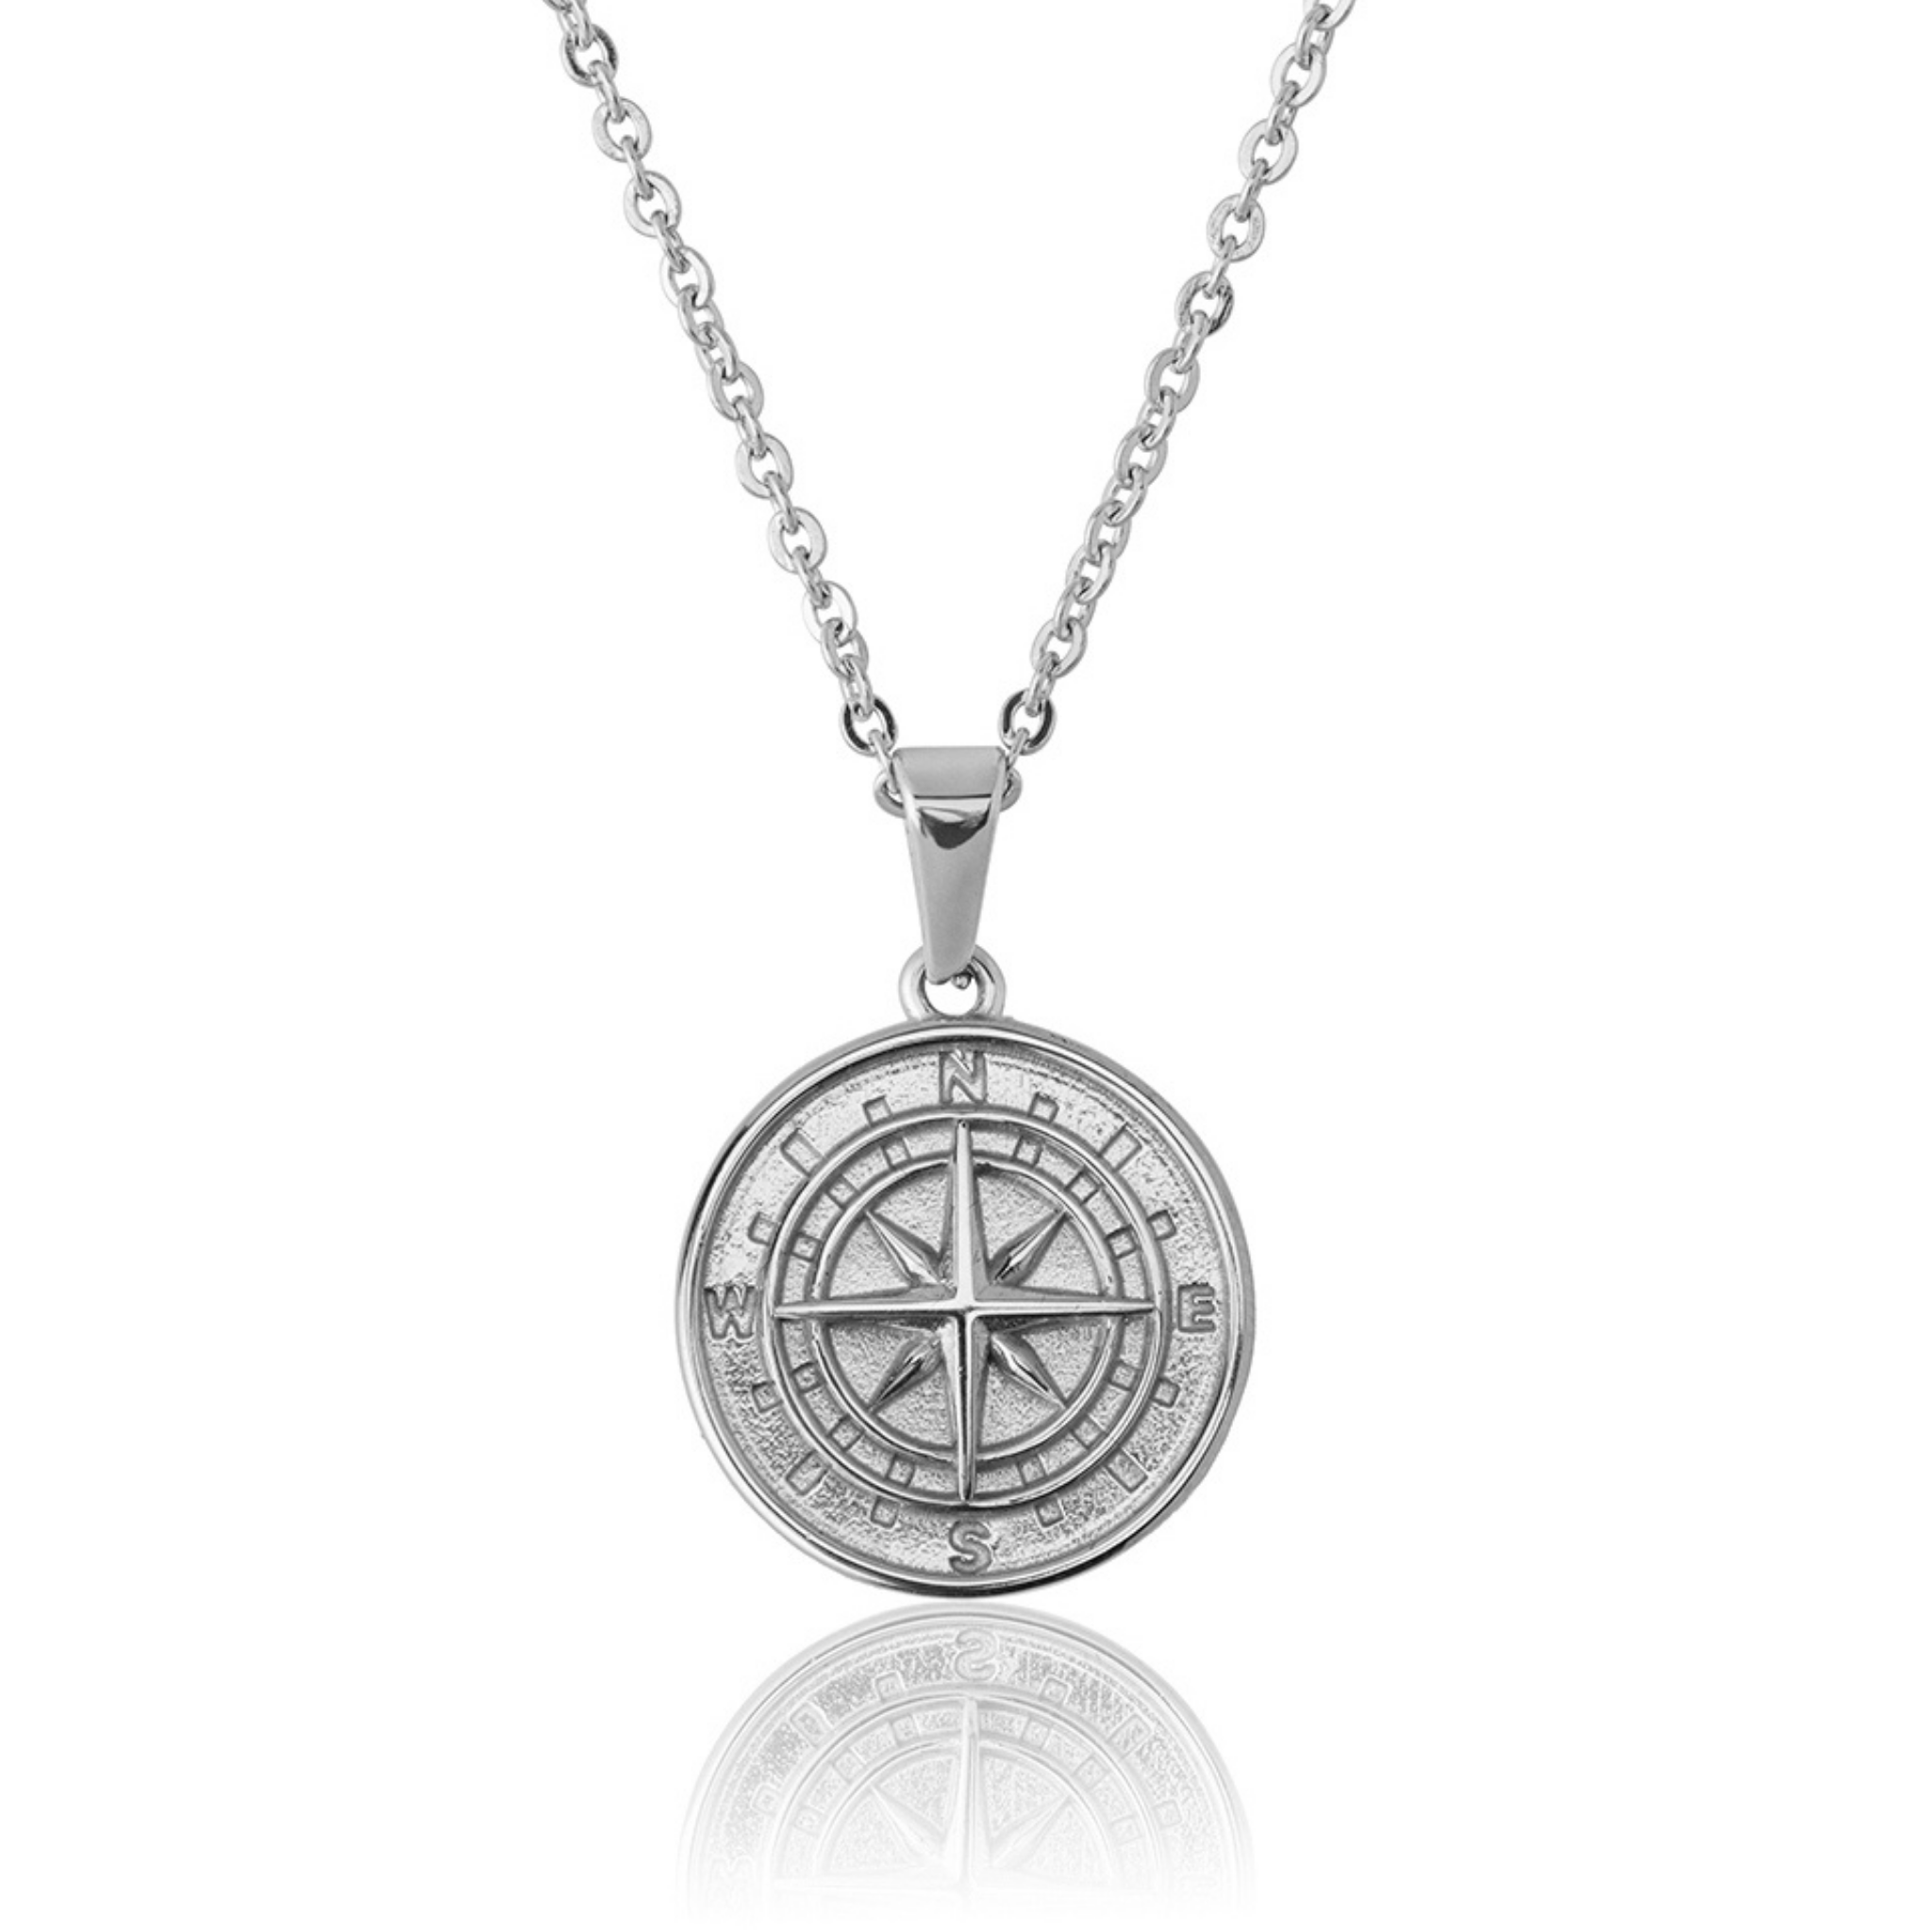 Stainless Steel Compass Pendant and Chain for Men